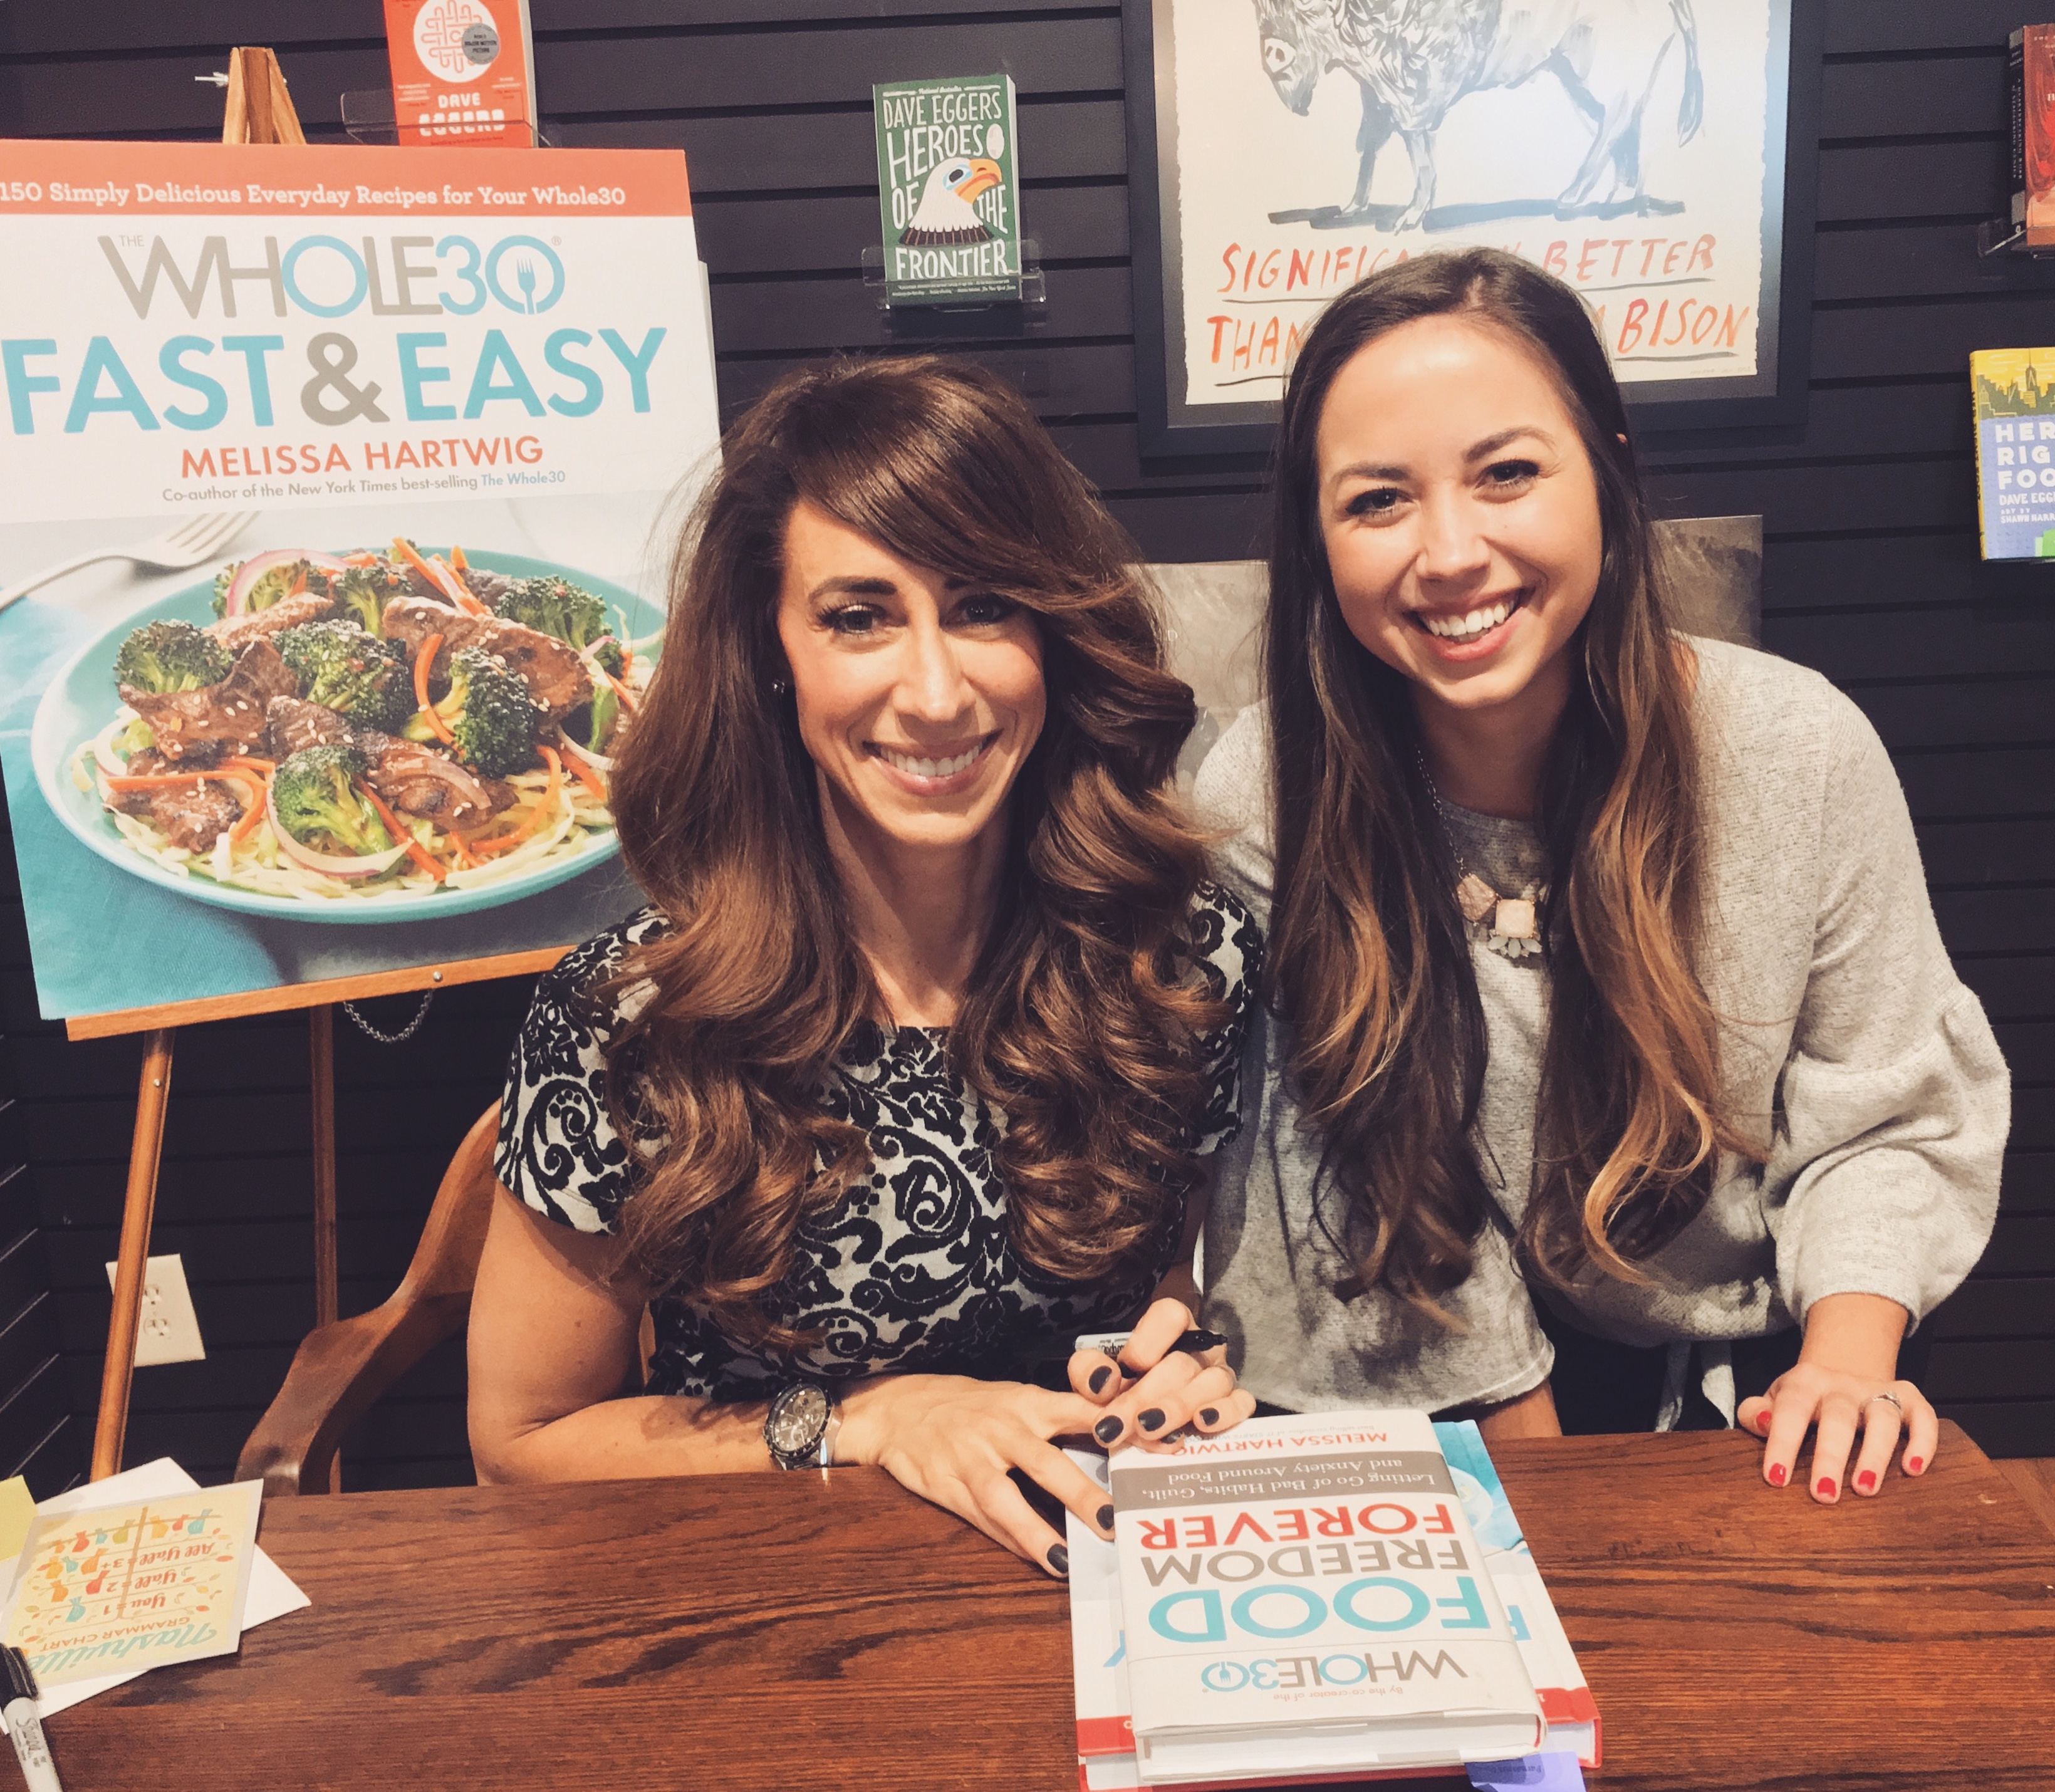 Whole30 Book Signing Event in Nashville, TN